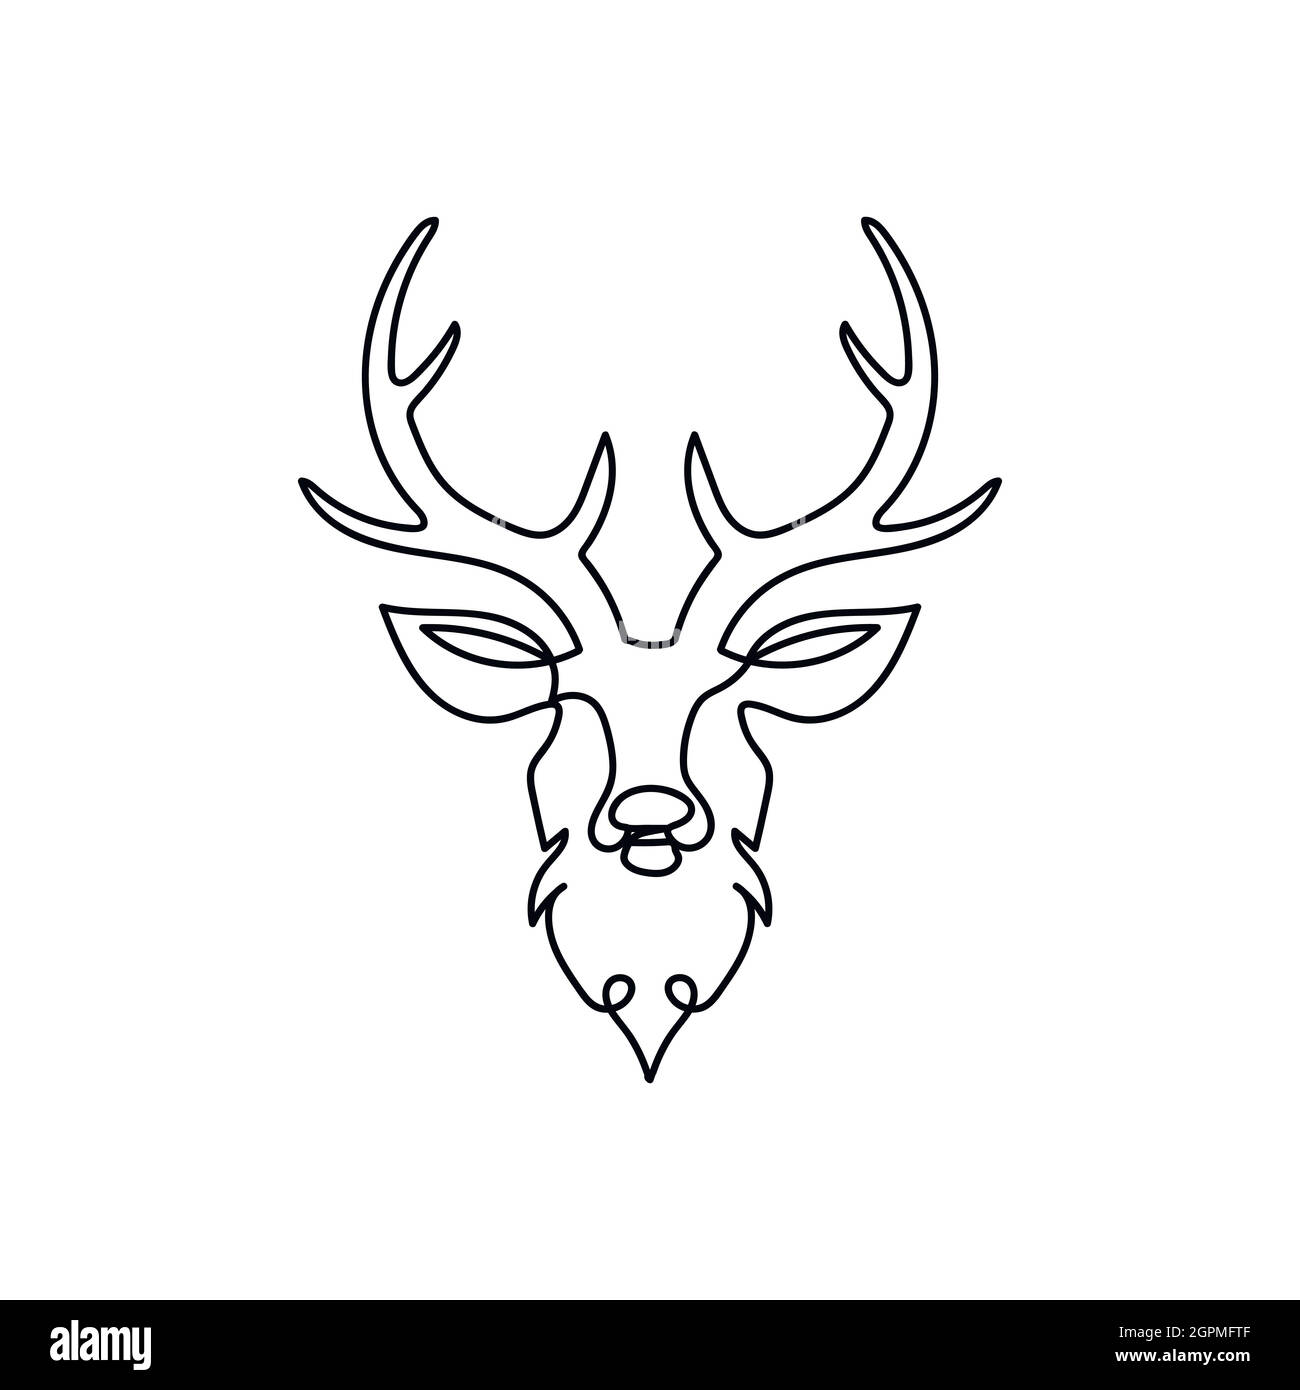 Continuous one line of reindeer in silhouette. Minimal style. Perfect for cards, party invitations, posters, stickers, clothing. Black abstract icon. Logo concept. Christmas concept Stock Vector